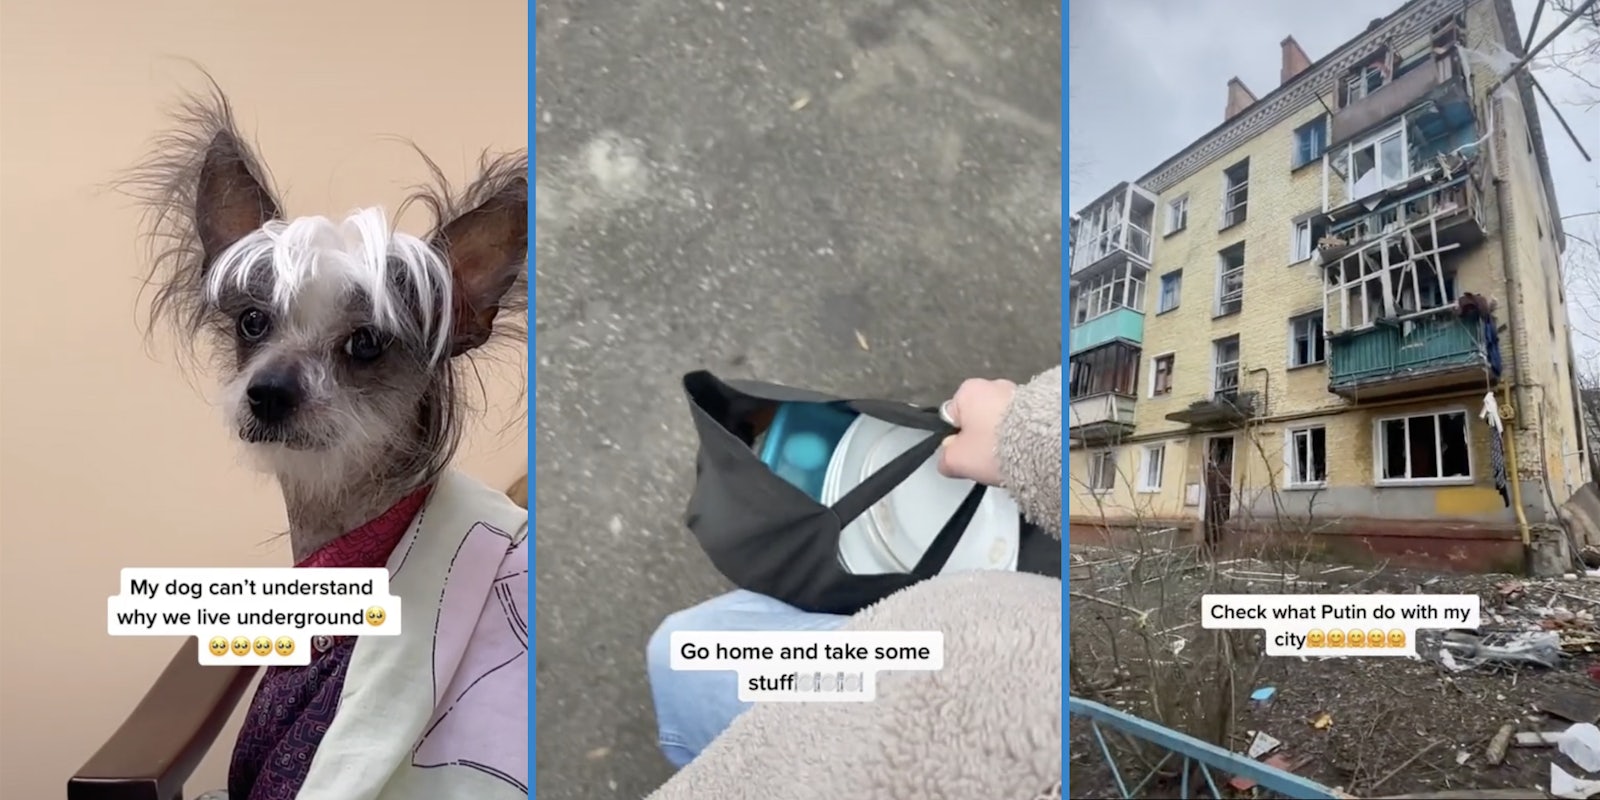 'My dog can't understand why we live underground' (L), 'Go home and take some stuff' featuring a bag of plates (M), 'Check what Putin do with my city' featuring damaged building (R)